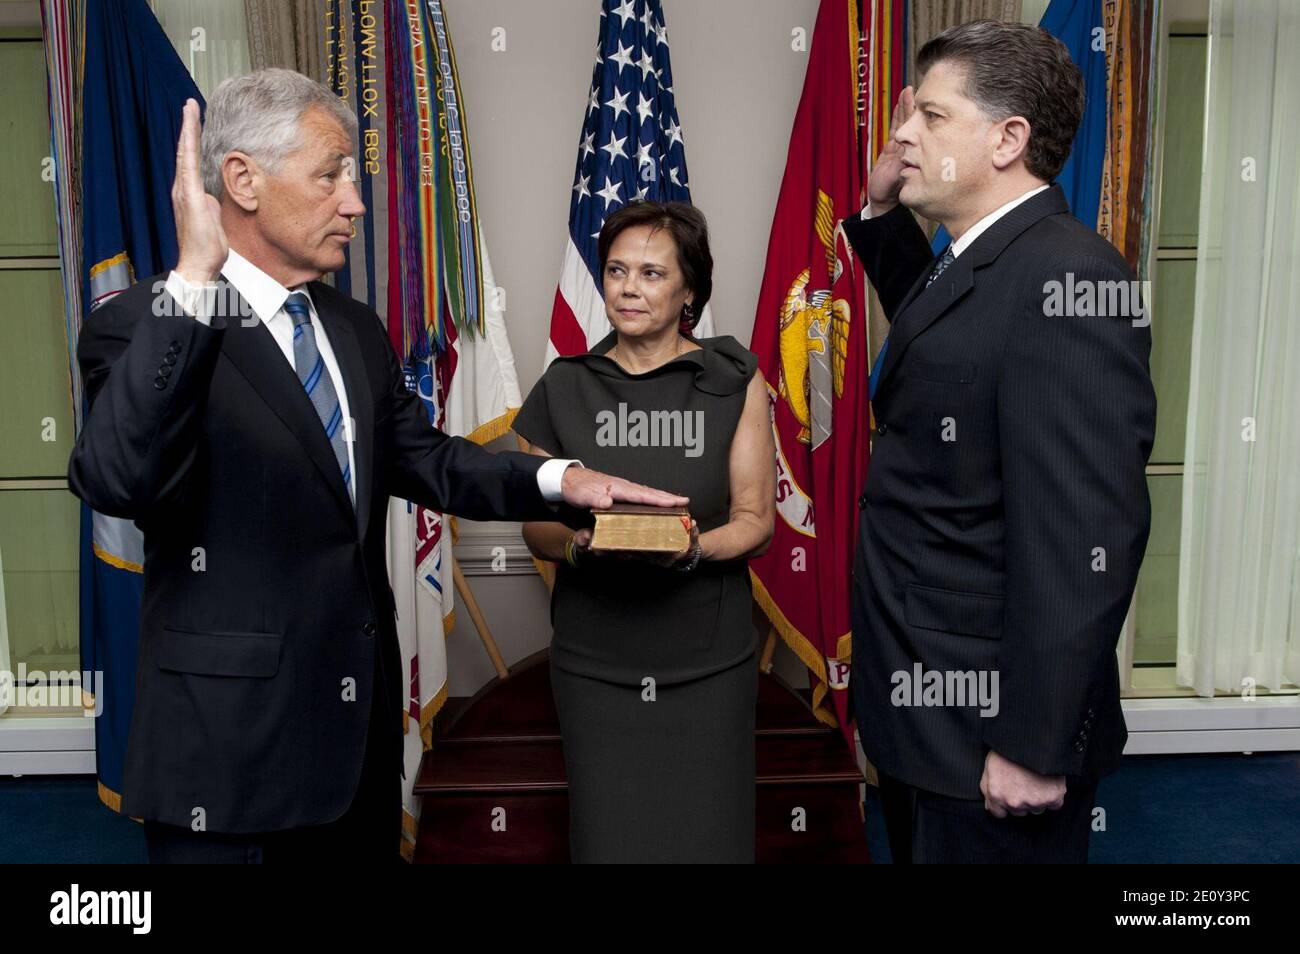 Lilibet Hagel, center, holds the Bible for her husband Chuck Hagel, left, as he is sworn into office as the 24th Secretary of Defense by DoD Director of Administration and Management Michael L. Rhodes, right Stock Photo